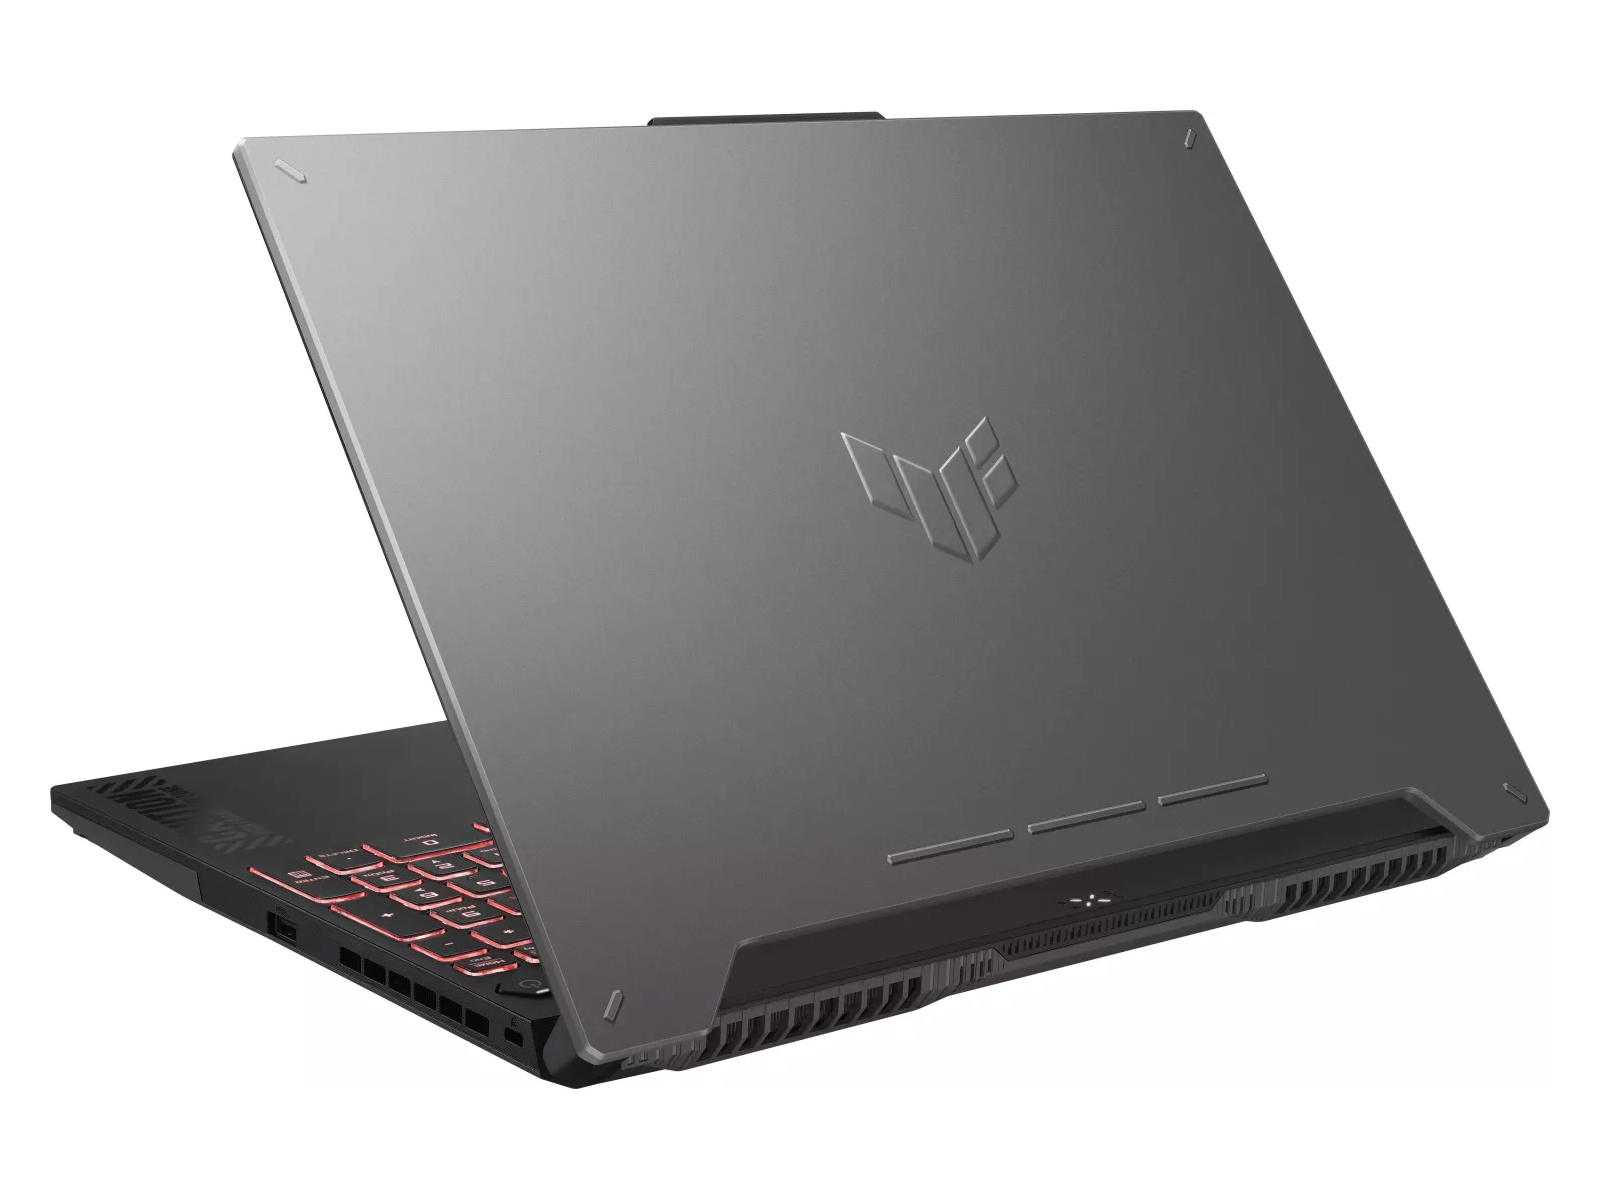 Asus TUF Gaming A15 laptop review: Making things 'TUF' for rivals